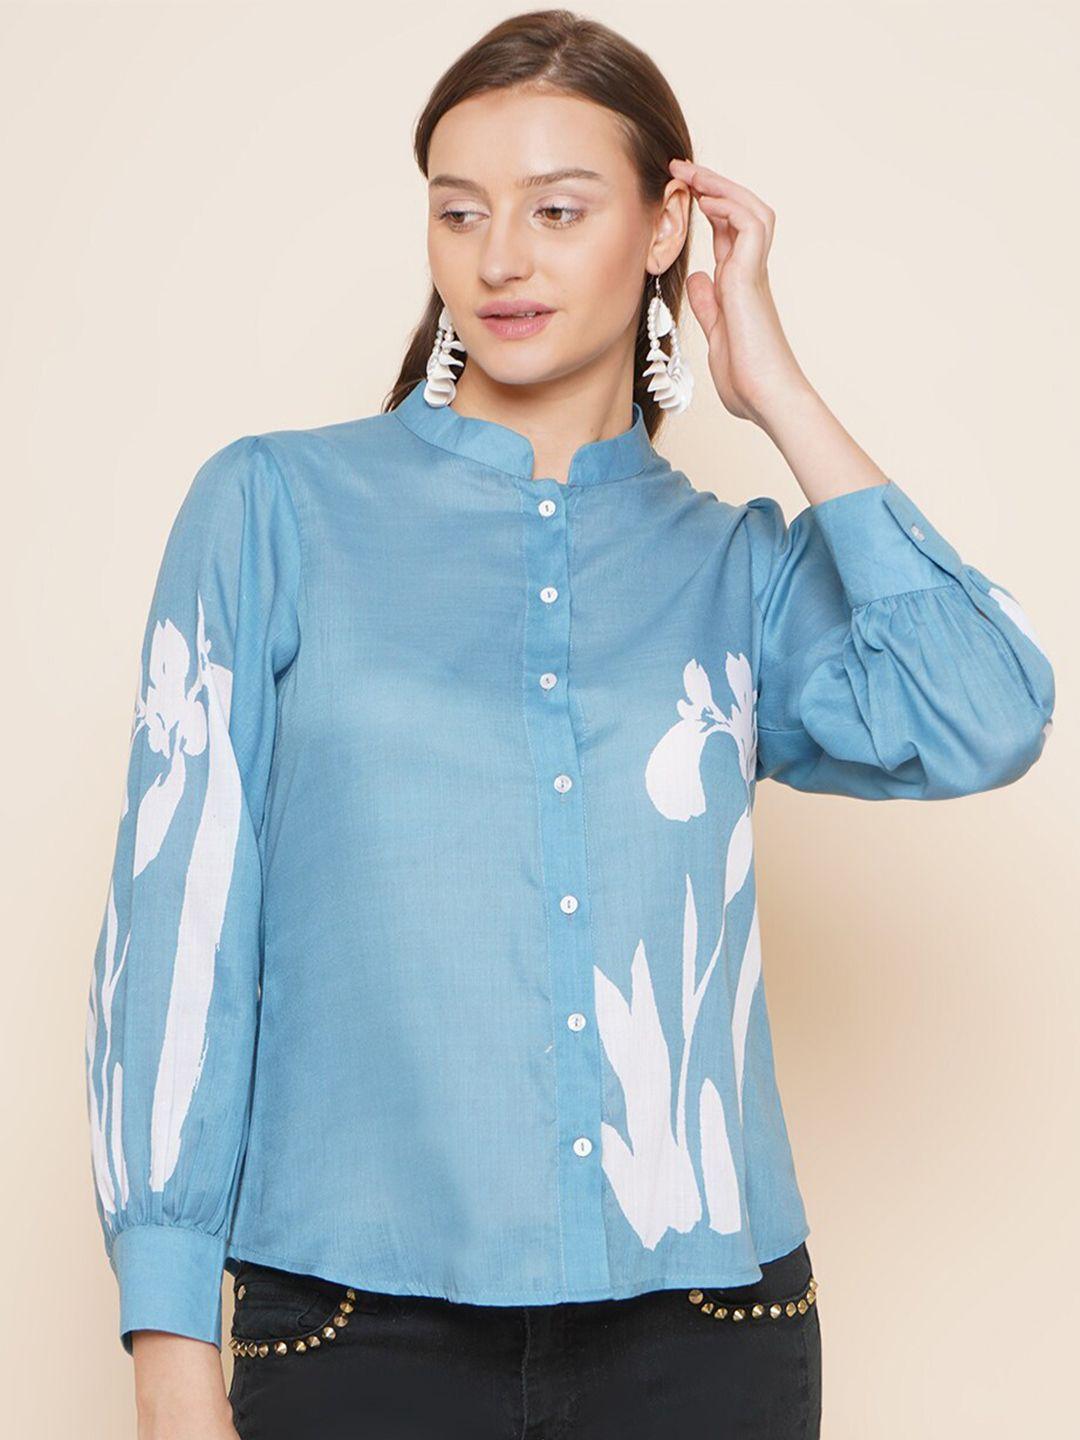 bhama couture floral printed mandarin collar cotton shirt style top